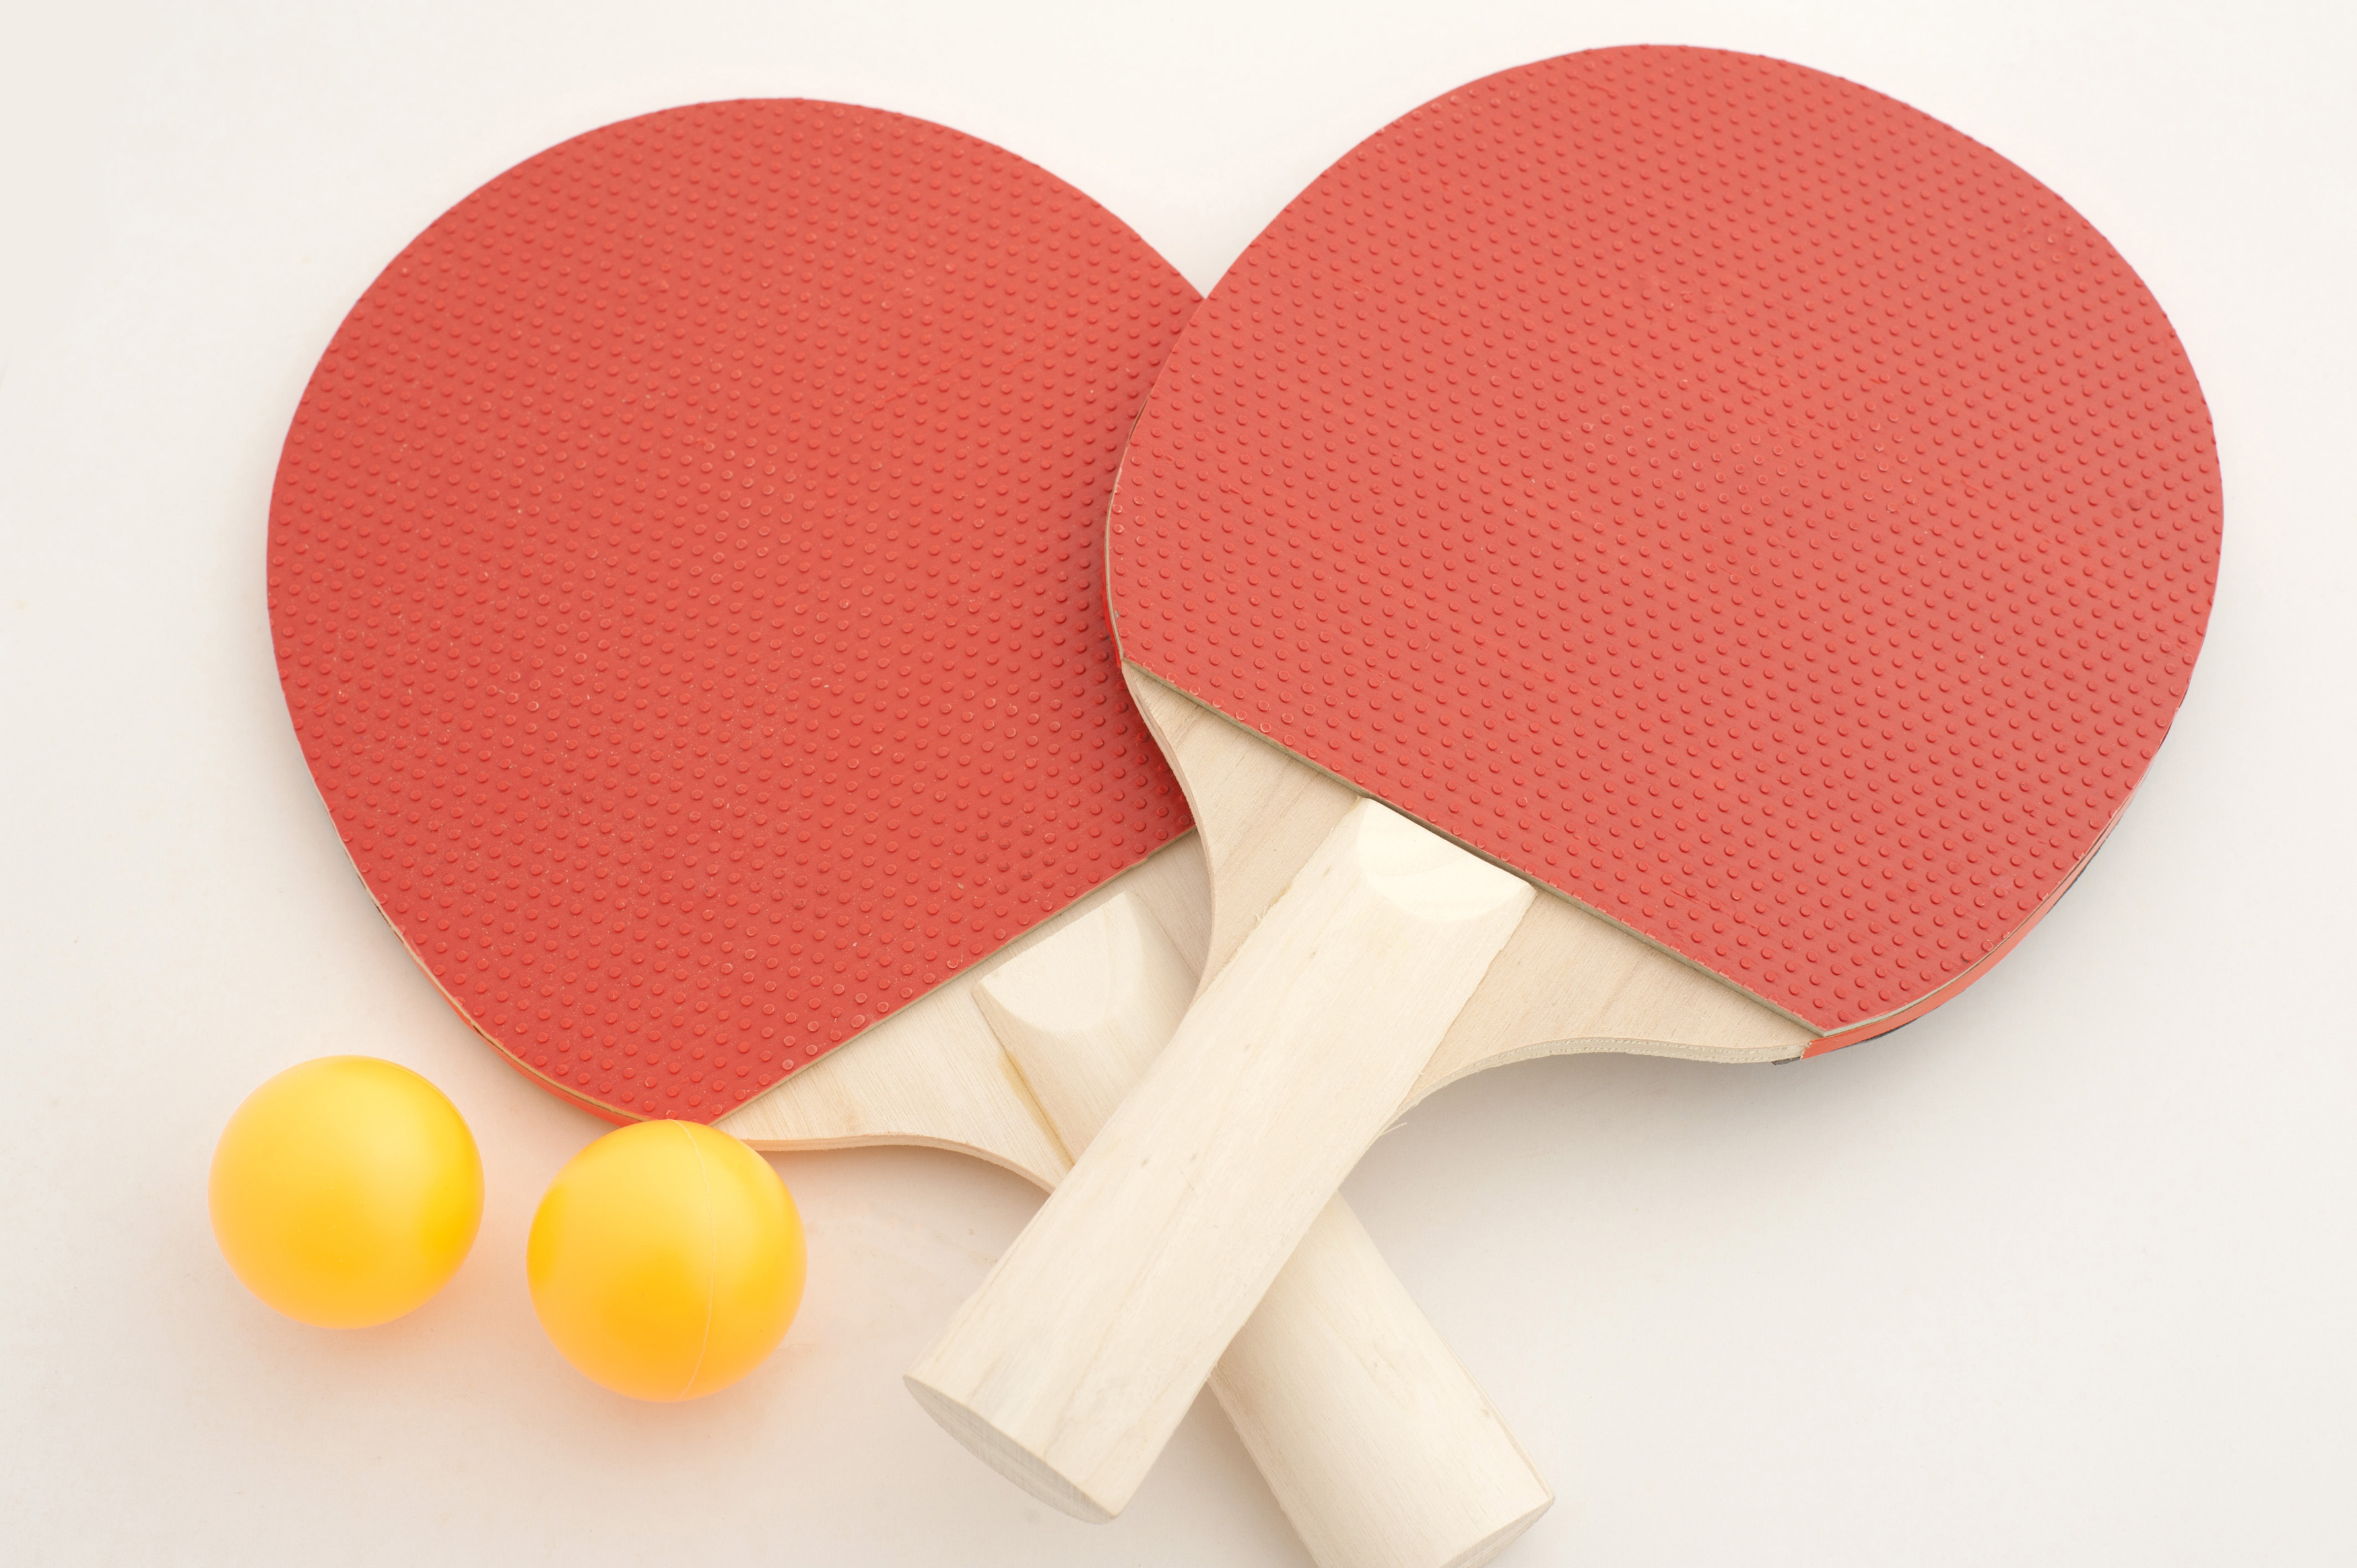 Two Red Pingpong Paddles And White Ball On White Ground Stock Photo -  Download Image Now - iStock